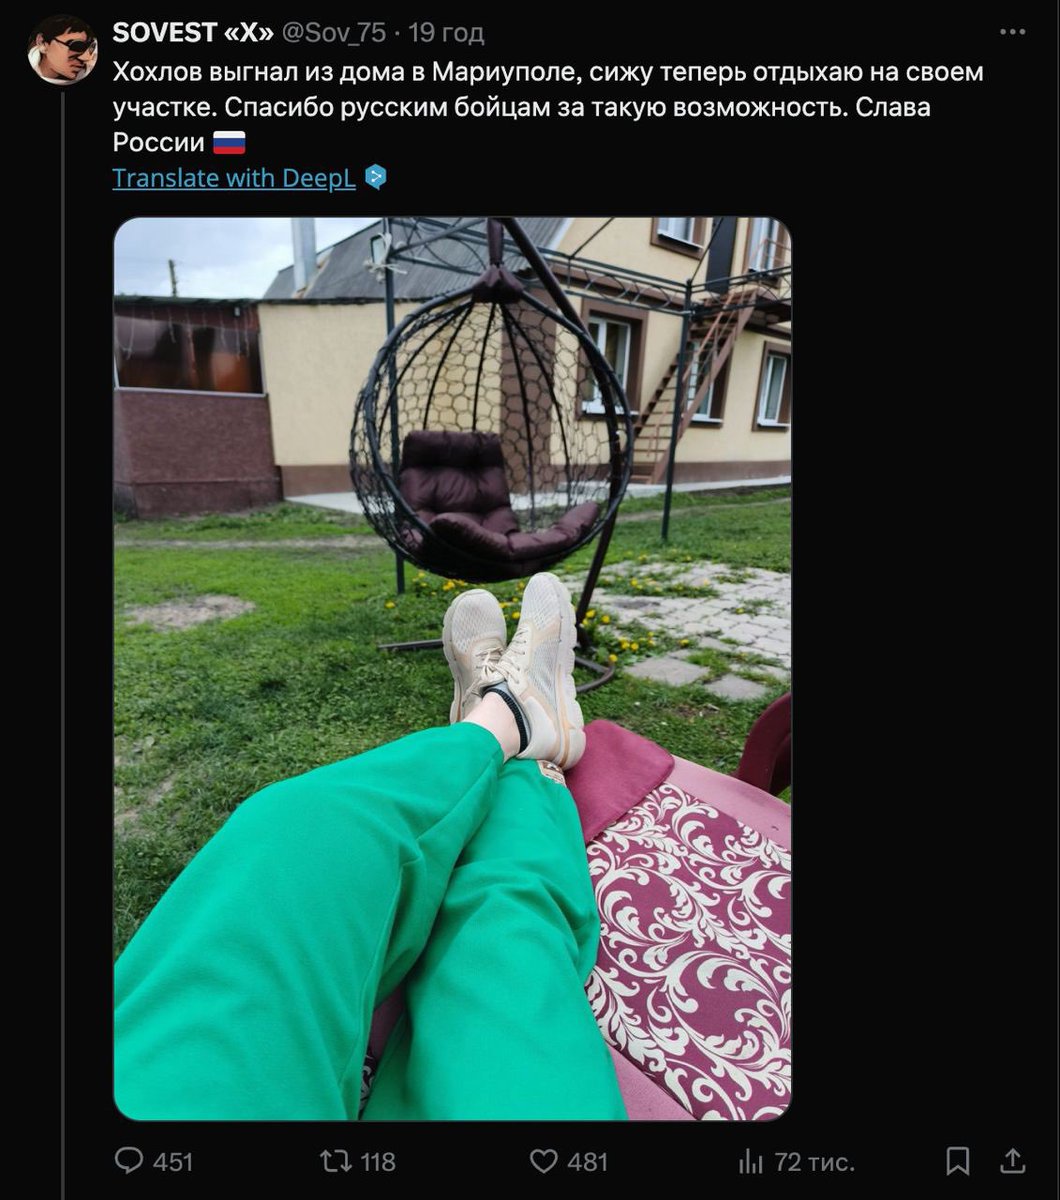 A 🇷🇺 occupier brags about having a great time at his new property in Mariupol. “Chased khokhols away. Now it’s mine. Thank you, russian fighters”. Yeah, “it’s all about NATO expansion”. #StandWithUkraine